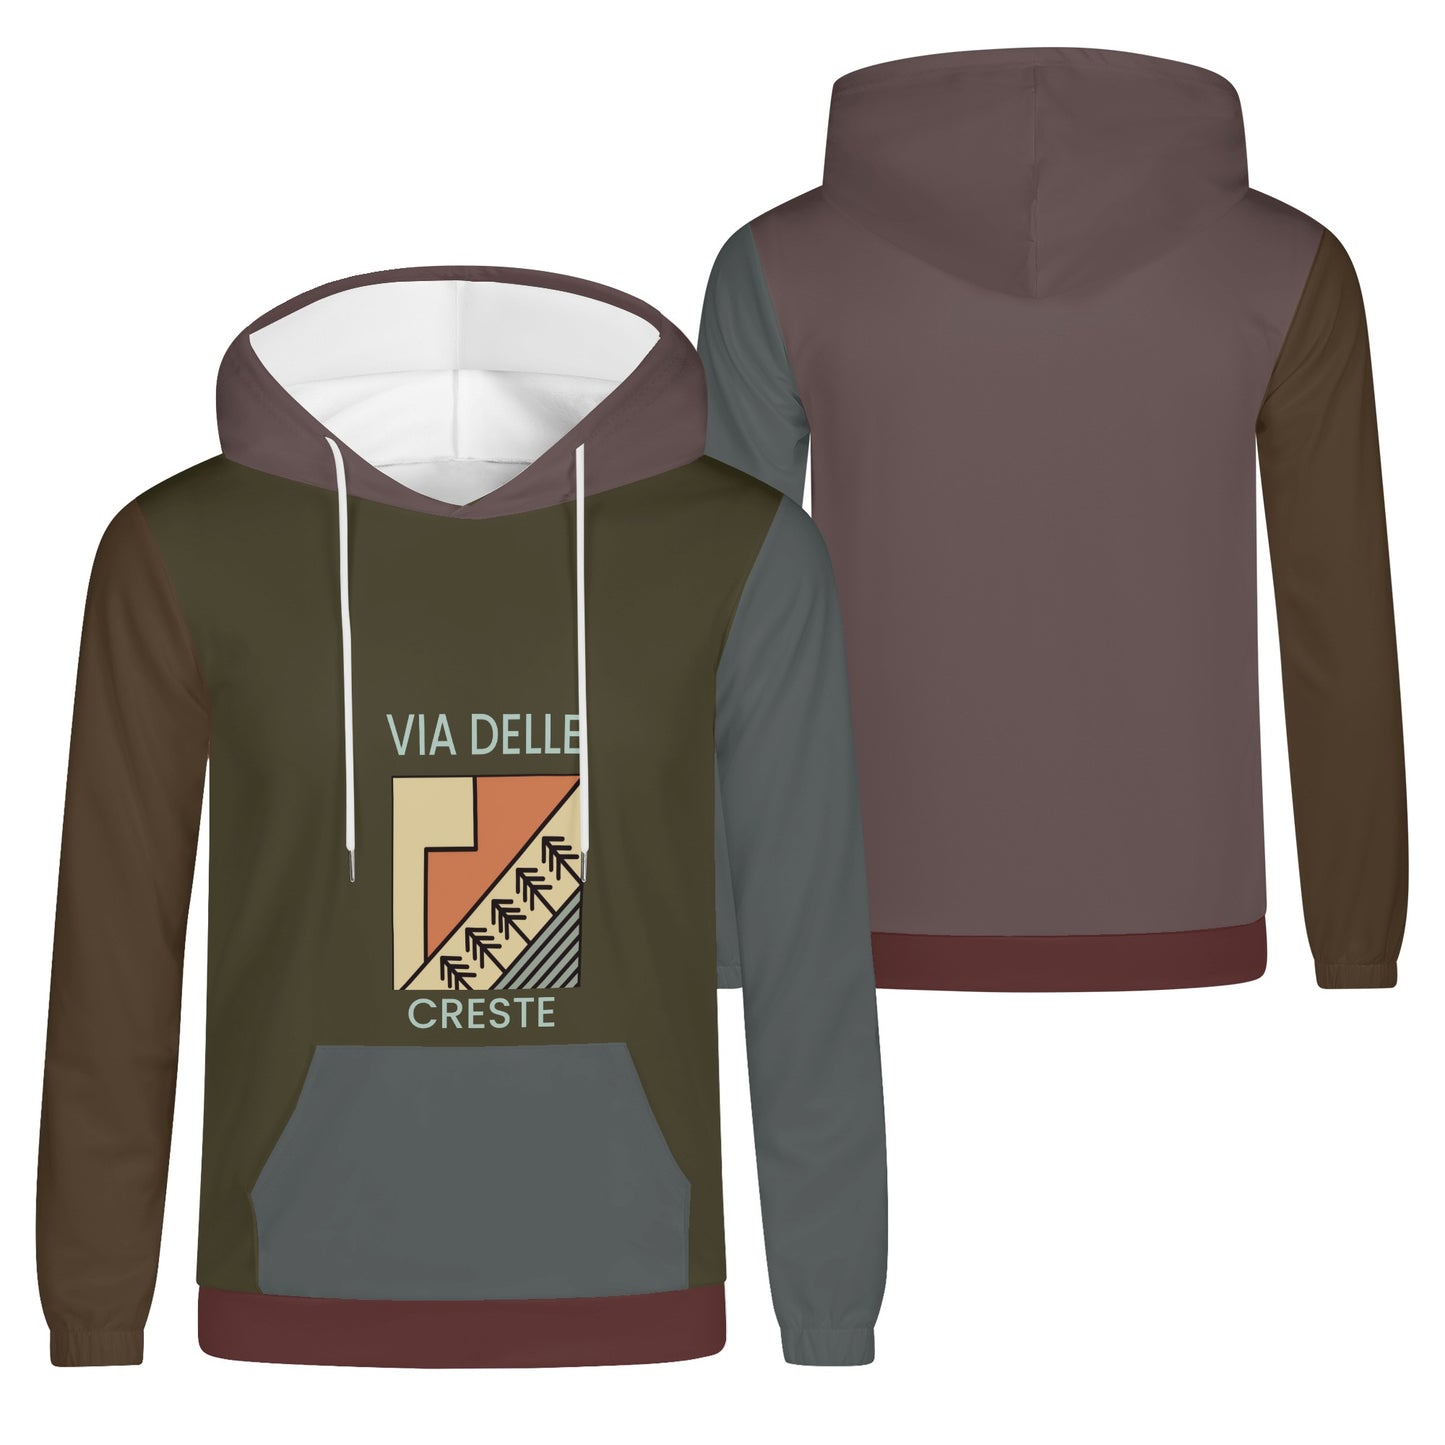 Pure Nature Project Via delle Creste Mens Lightweight All Over Printing Hoodie Sweatshirt